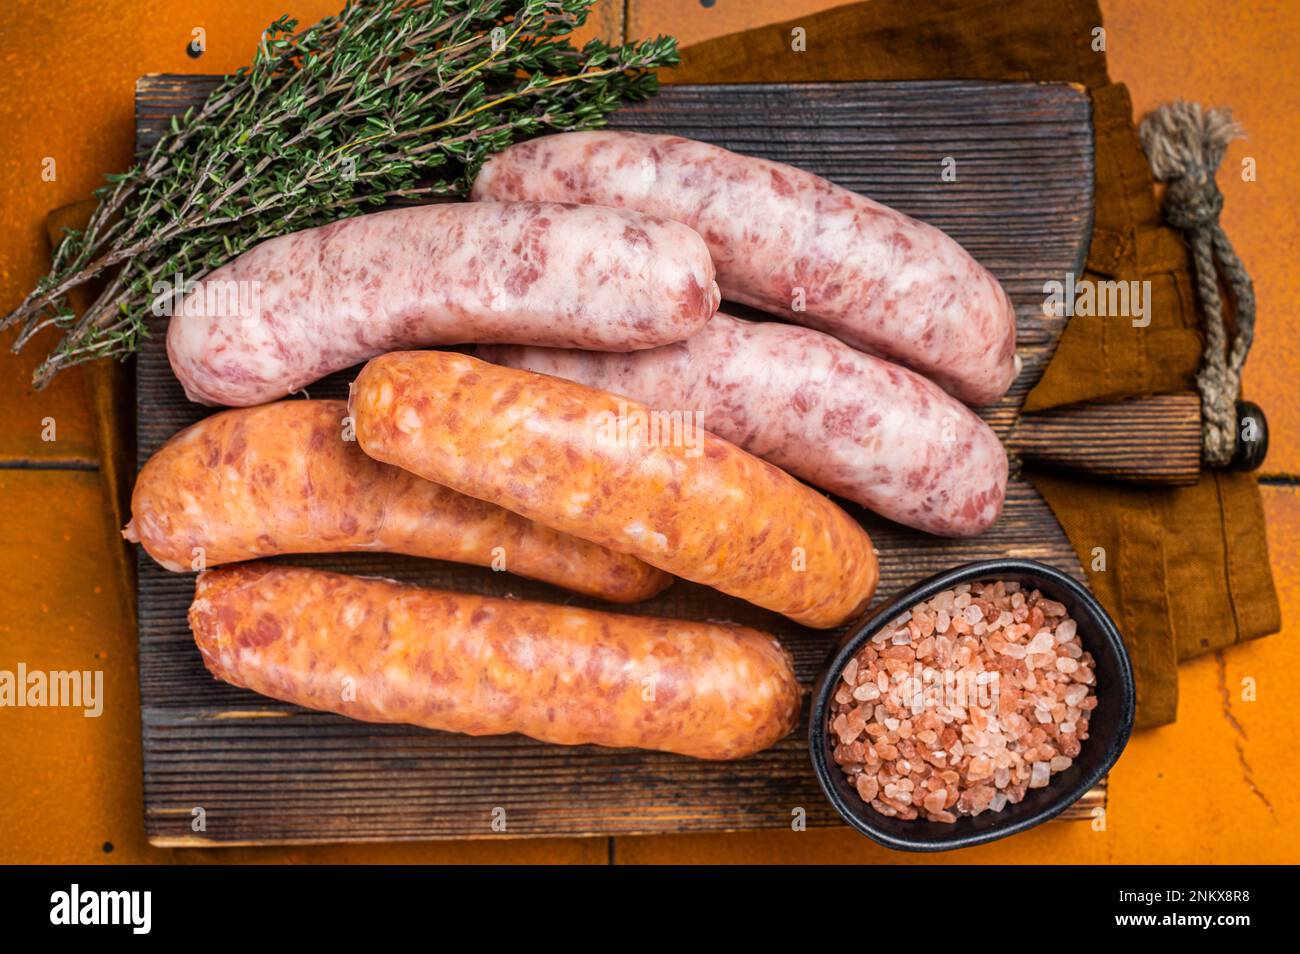 Fresh Raw Bratwurst and Chorizo meat sausages on wooden board. Orange background. Top view. Stock Photo